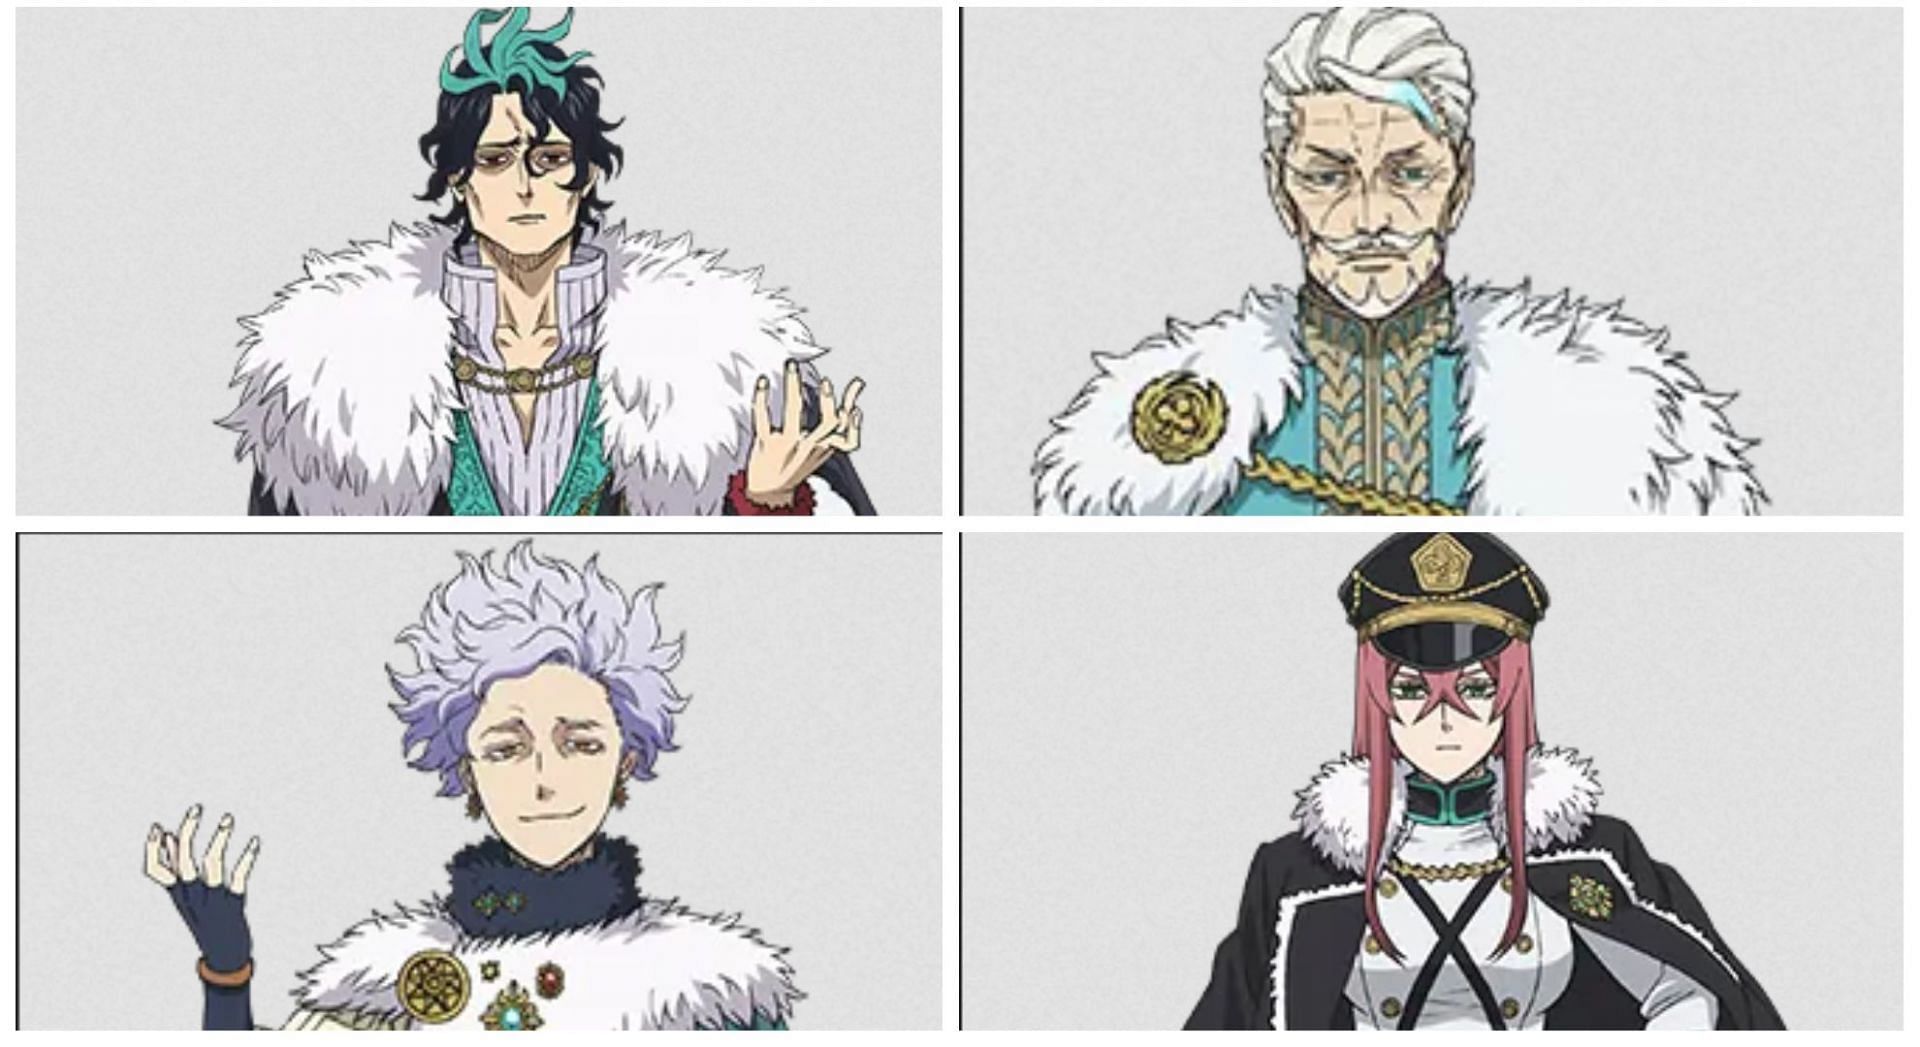 Black Clover: Sword of the Wizard King is everything fans needed